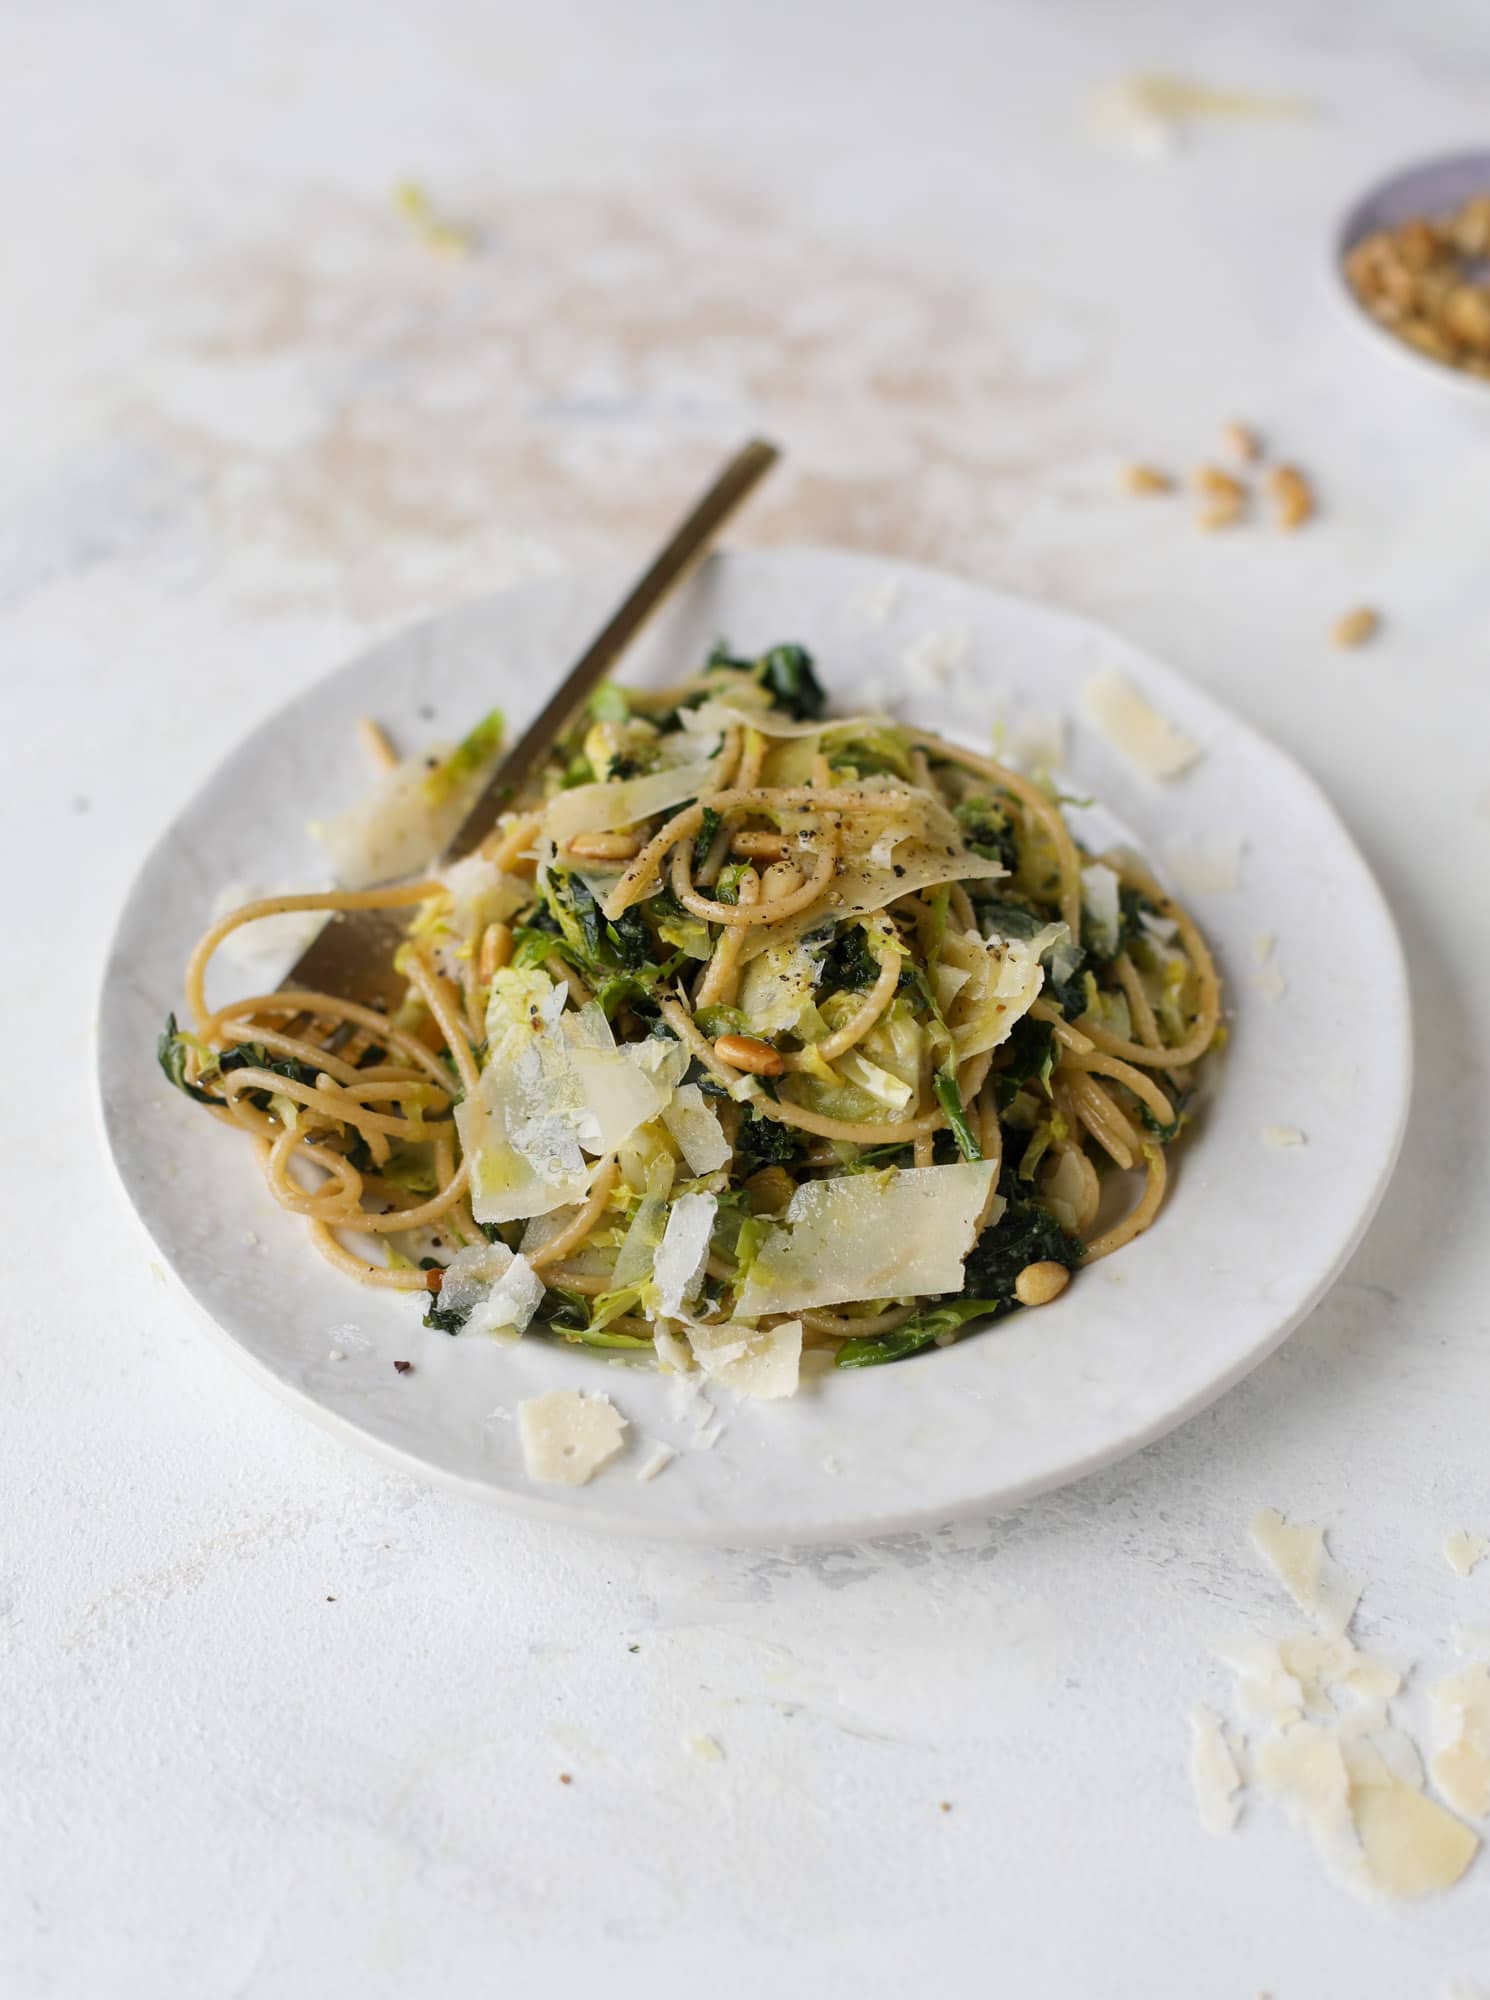 This brussels spaghetti with kale, parmesan and pine nuts is a super flavorful, quick and easy weeknight meal. You can add in a protein if you wish! I howsweeteats.com #brussels #spaghetti